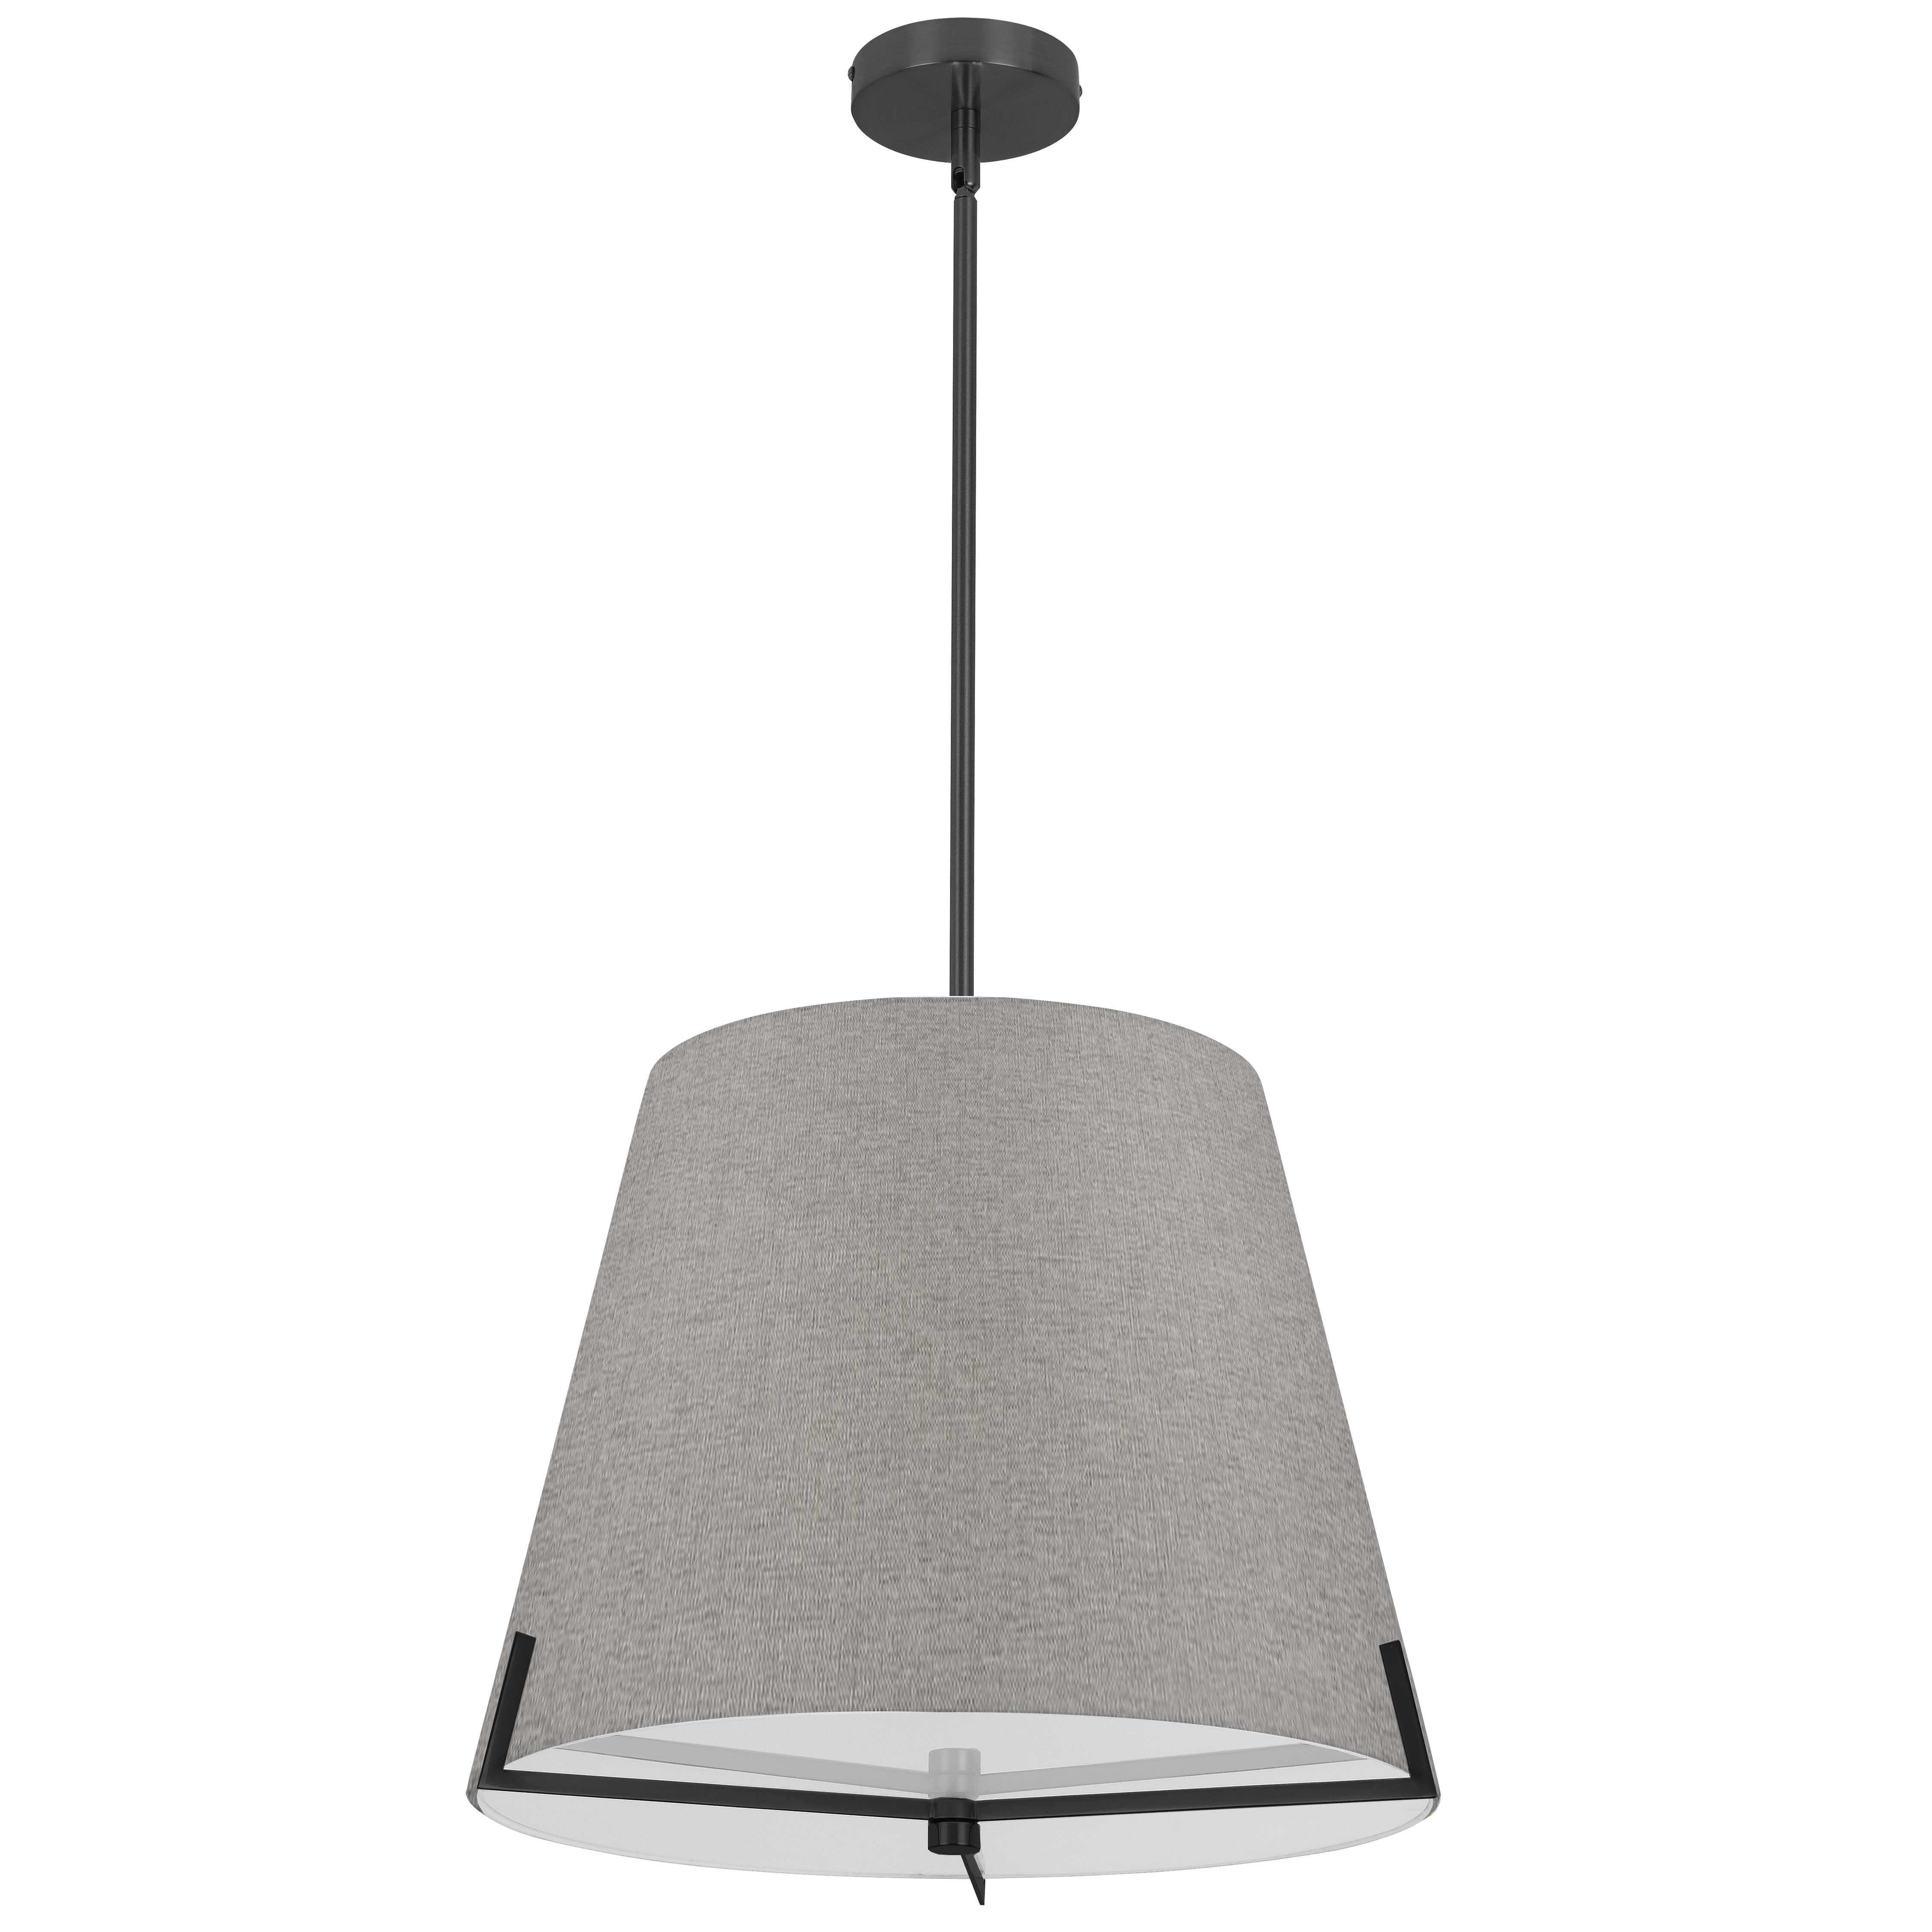 4 LT Incandescent Pendant, MB w/ GRY fabric shade